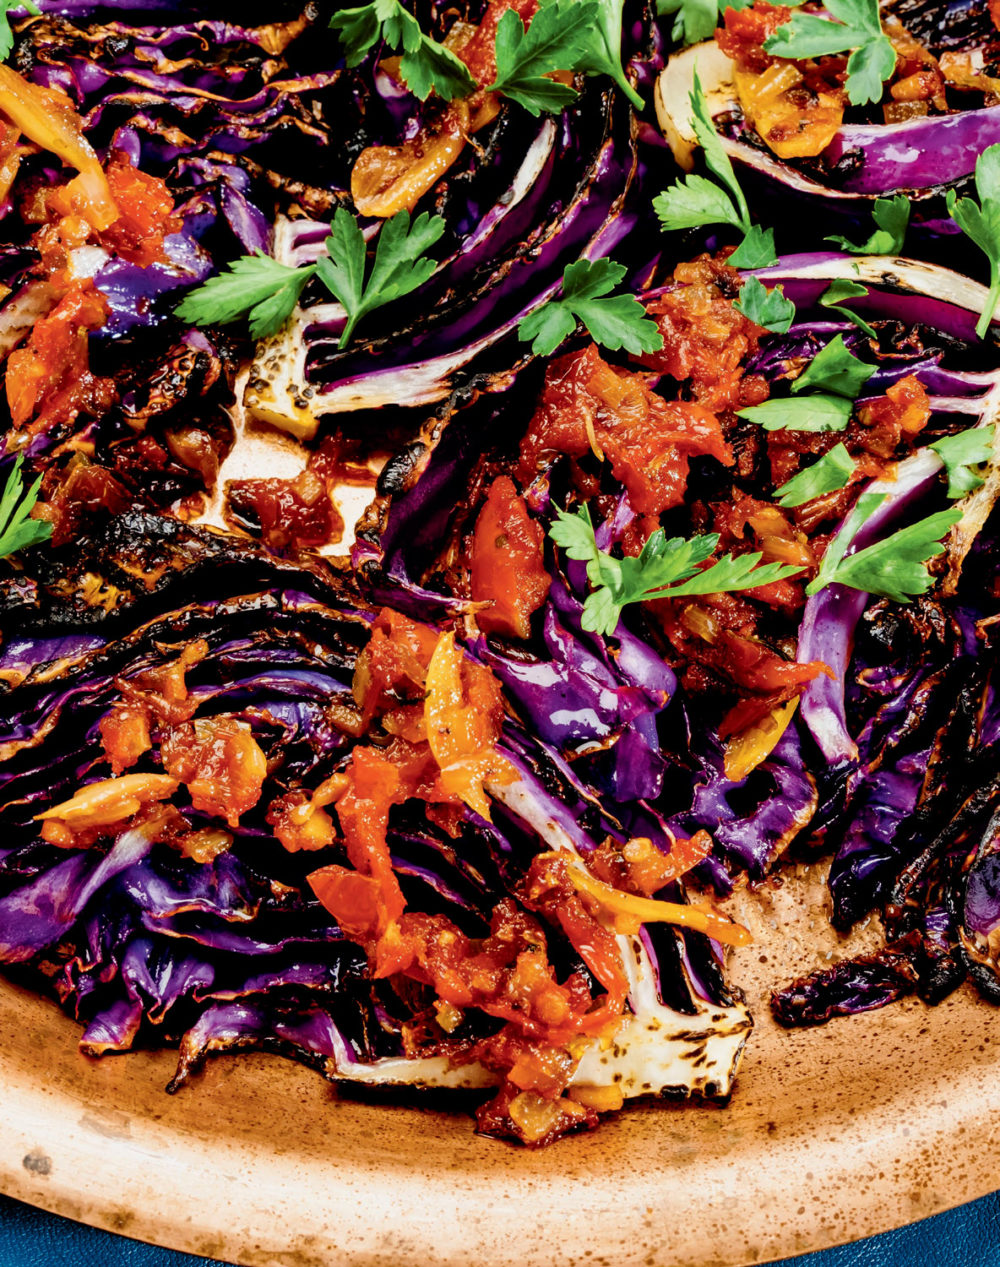 Charred purple cabbage with a red sauce drizzled on top.